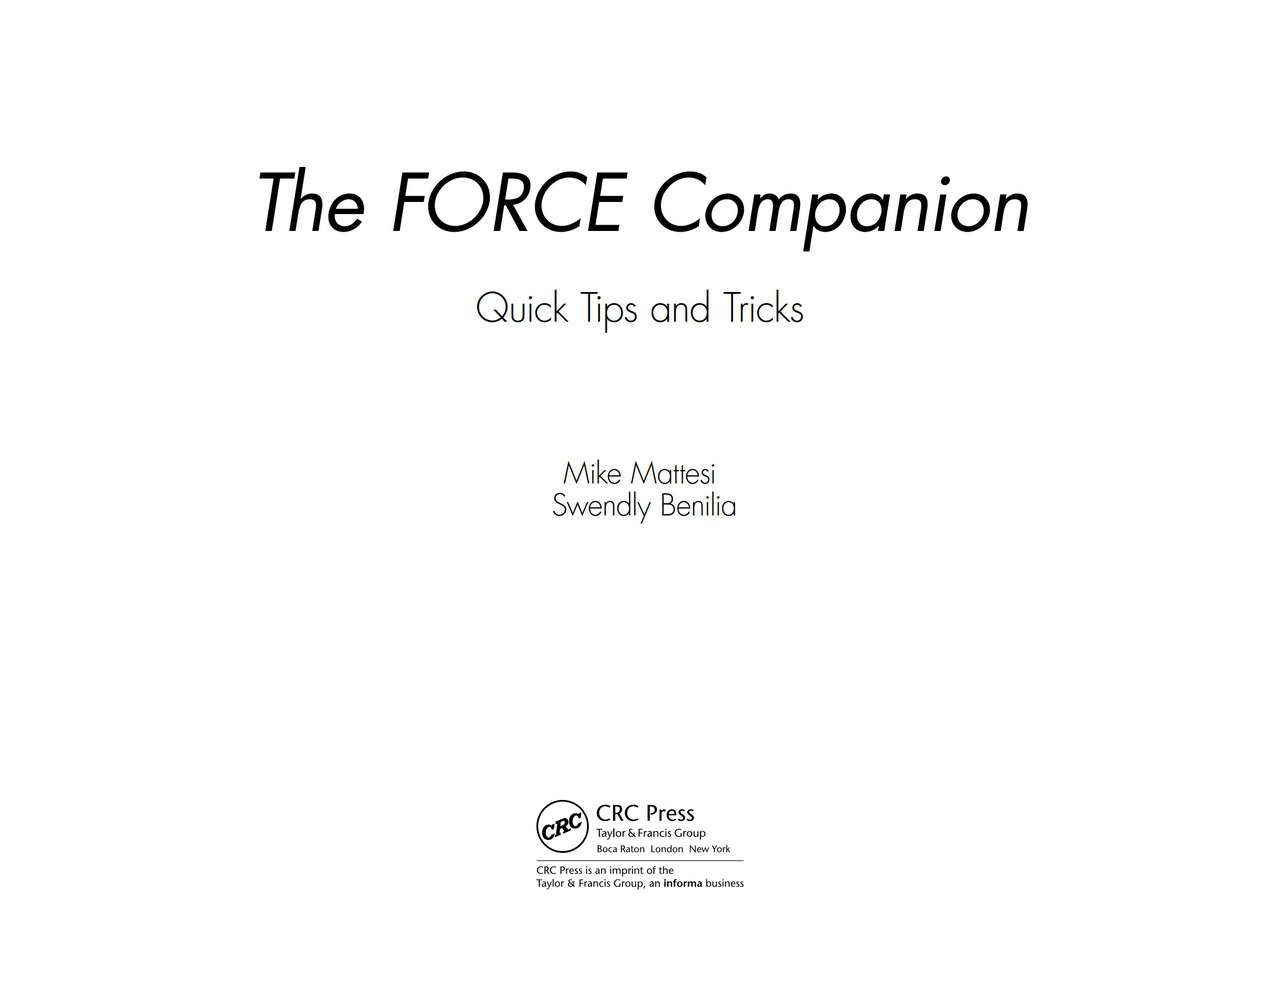 The Force companion_ quick tips and tricks-CRC Press (2019) - Michael D. Mattesi [Digital] 4